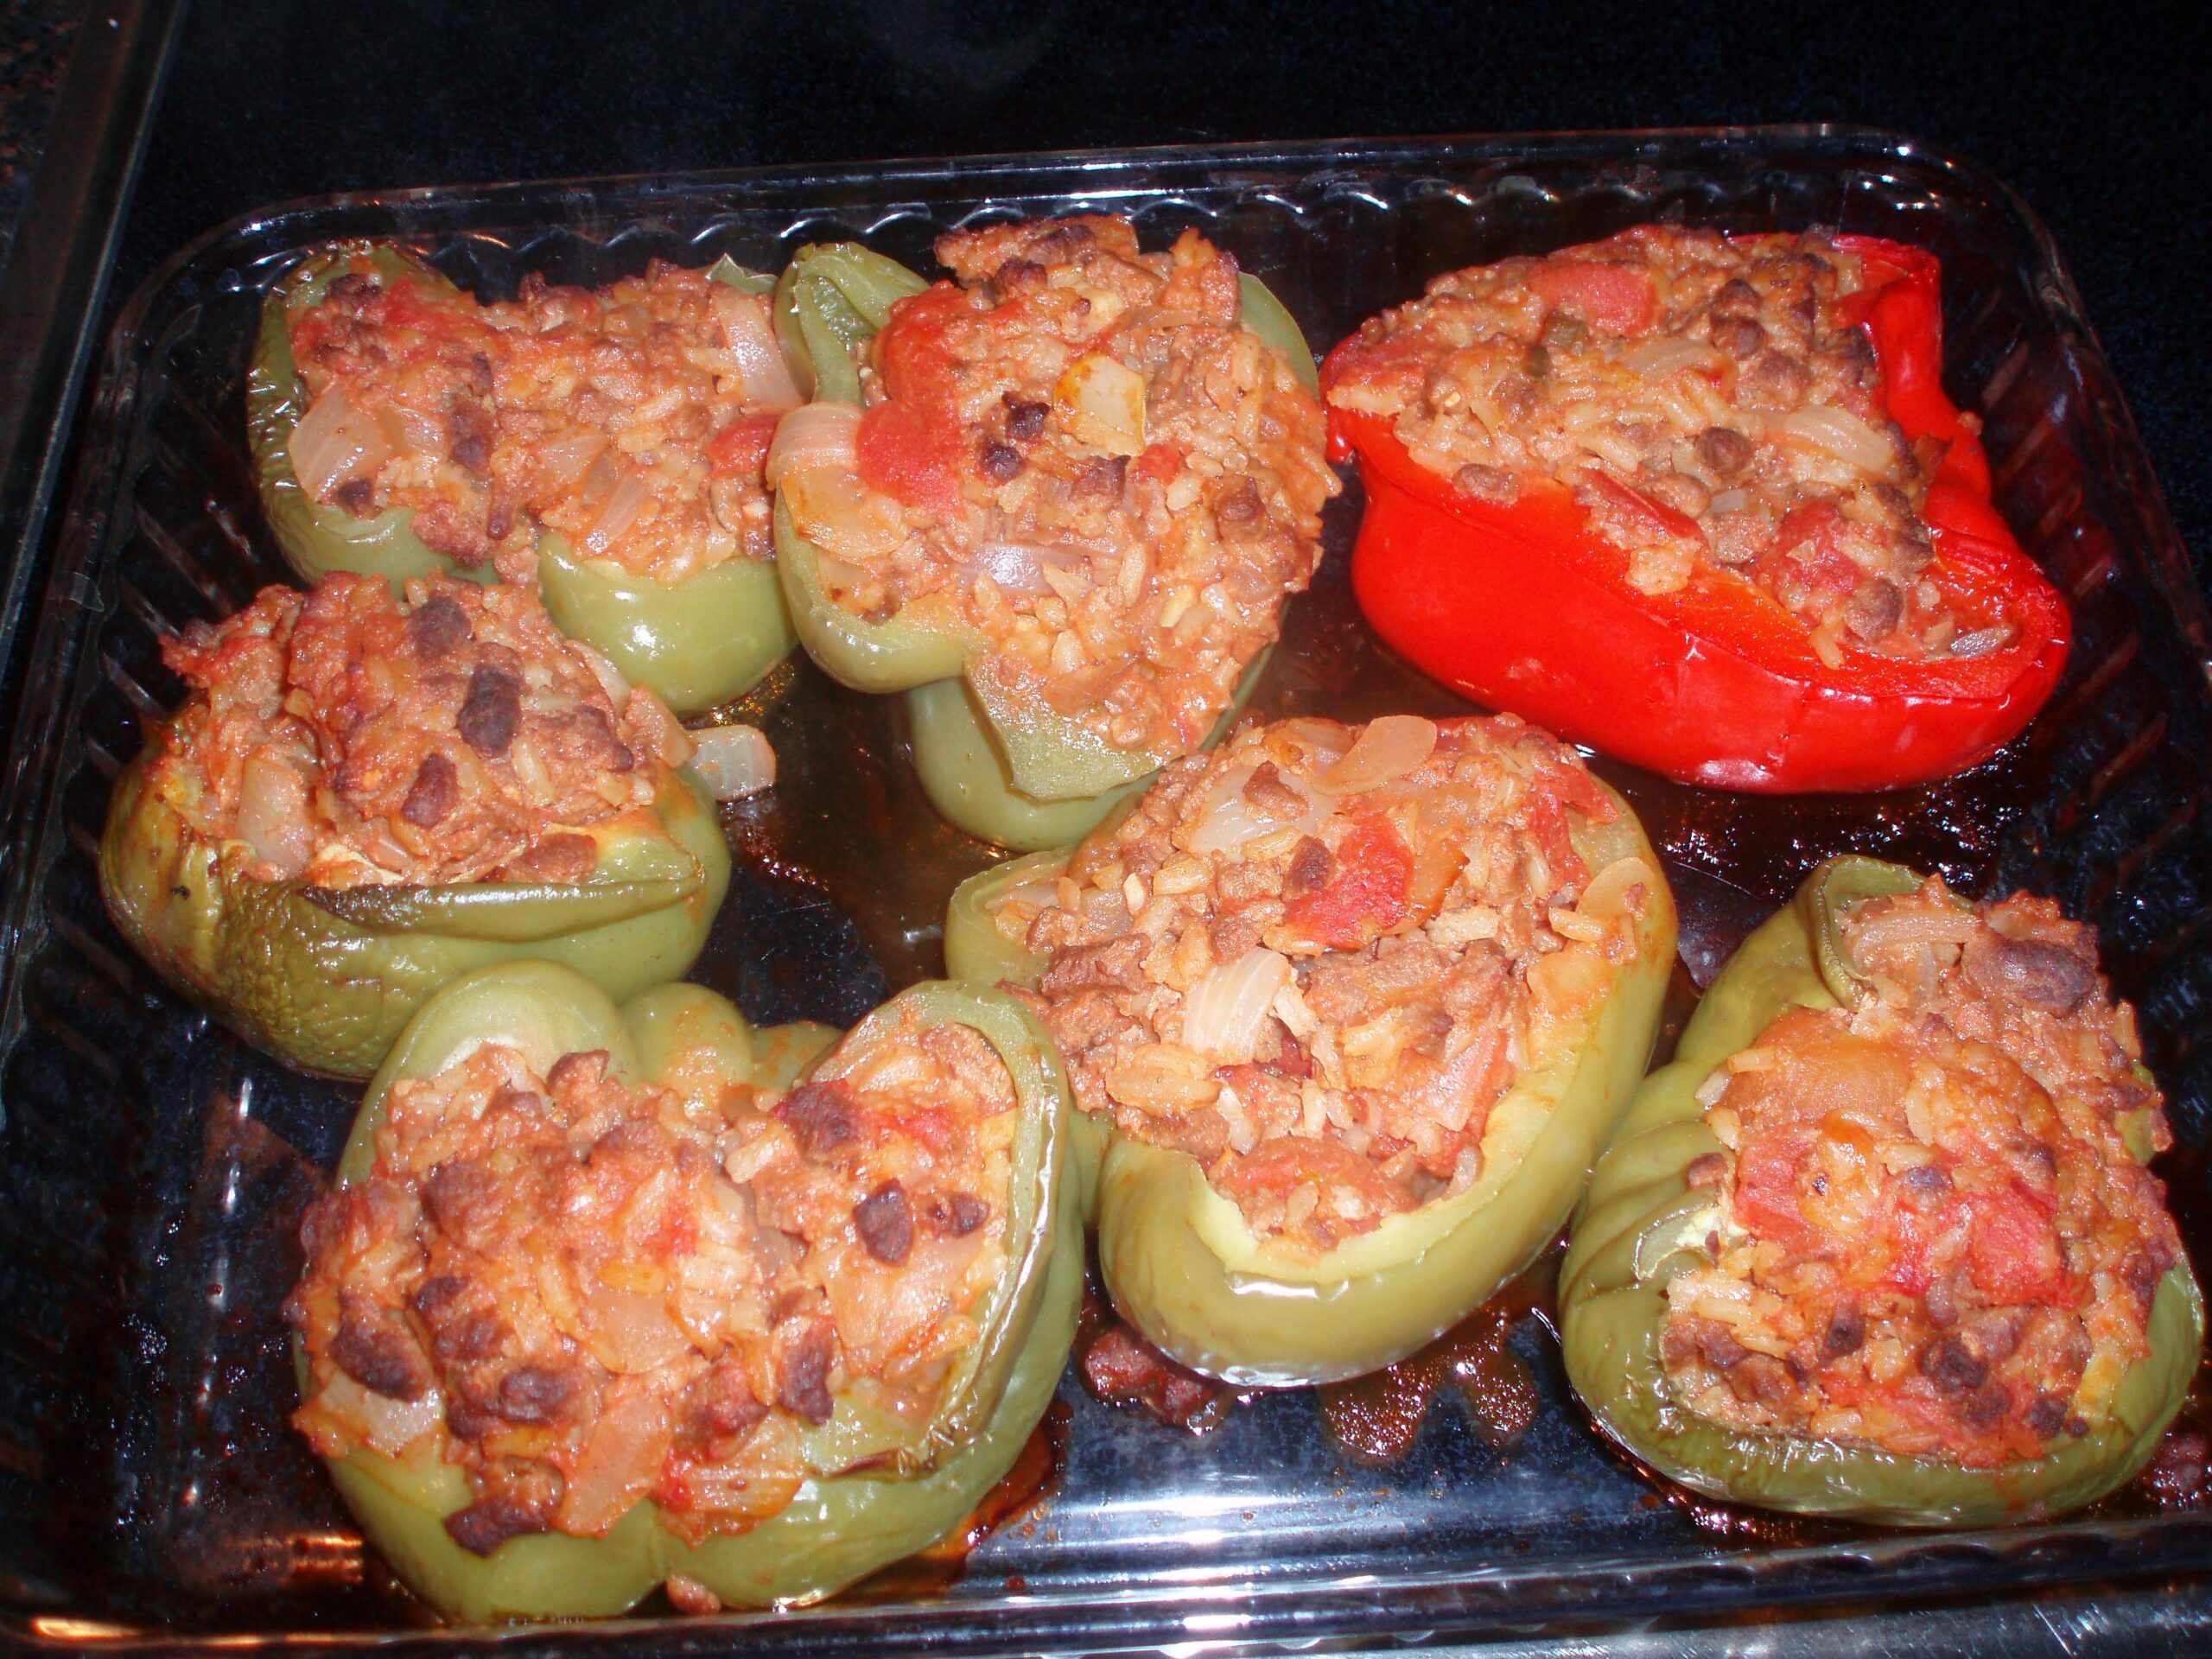  Get your veggies with a twist by trying these stuffed bell peppers for a hearty meal